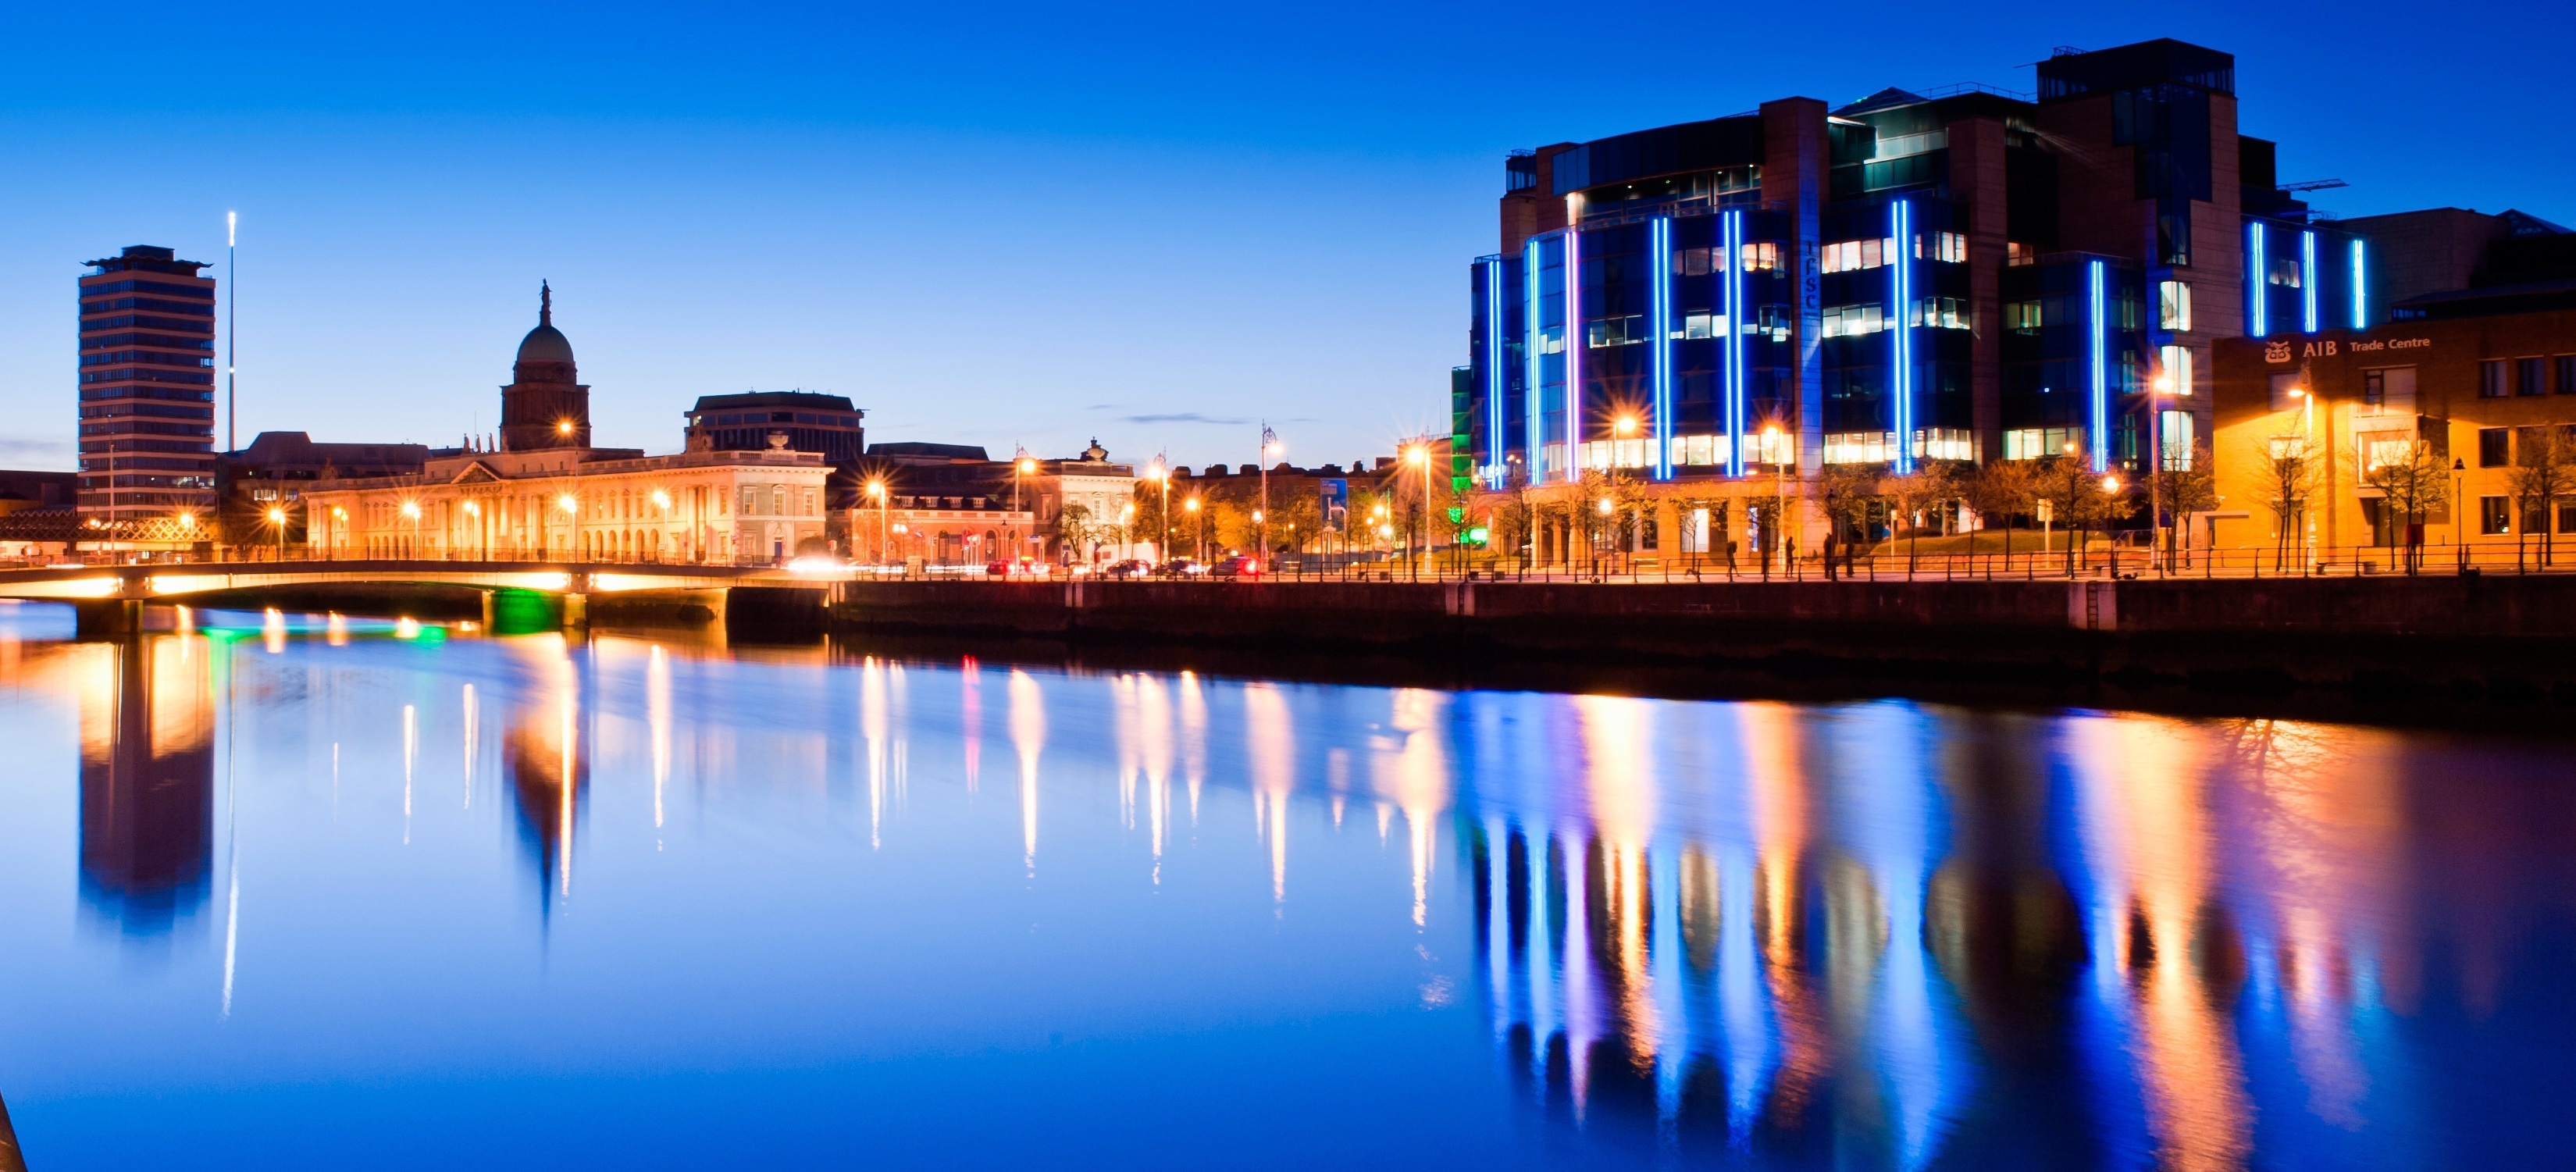 Dublin: The Custom House, Located on the north bank of the River Liffey, Cityscape, Sunset. 3300x1510 Dual Screen Wallpaper.